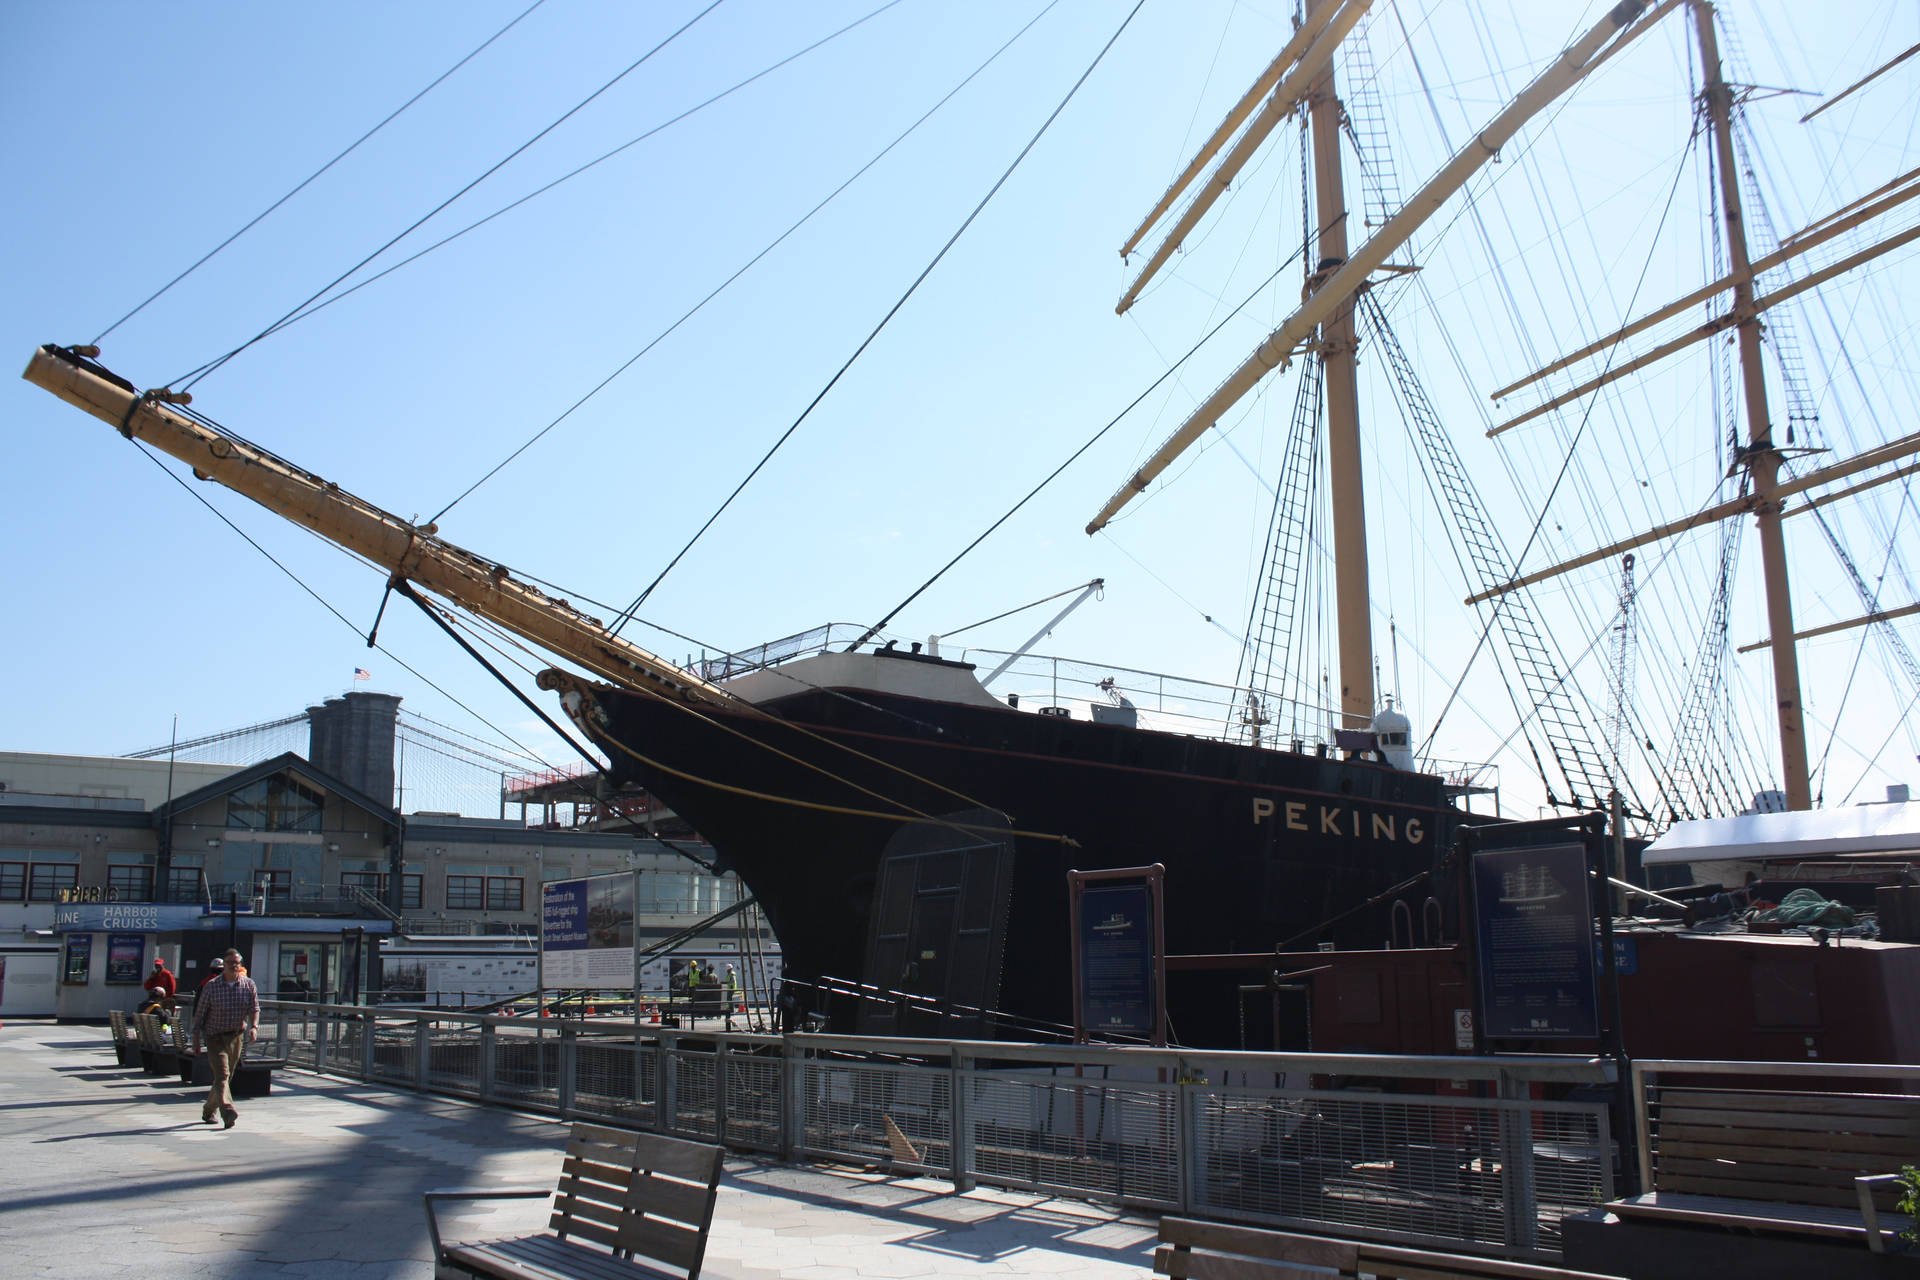 Southstreet Seaport Peking Ship Could Be Translated To: 